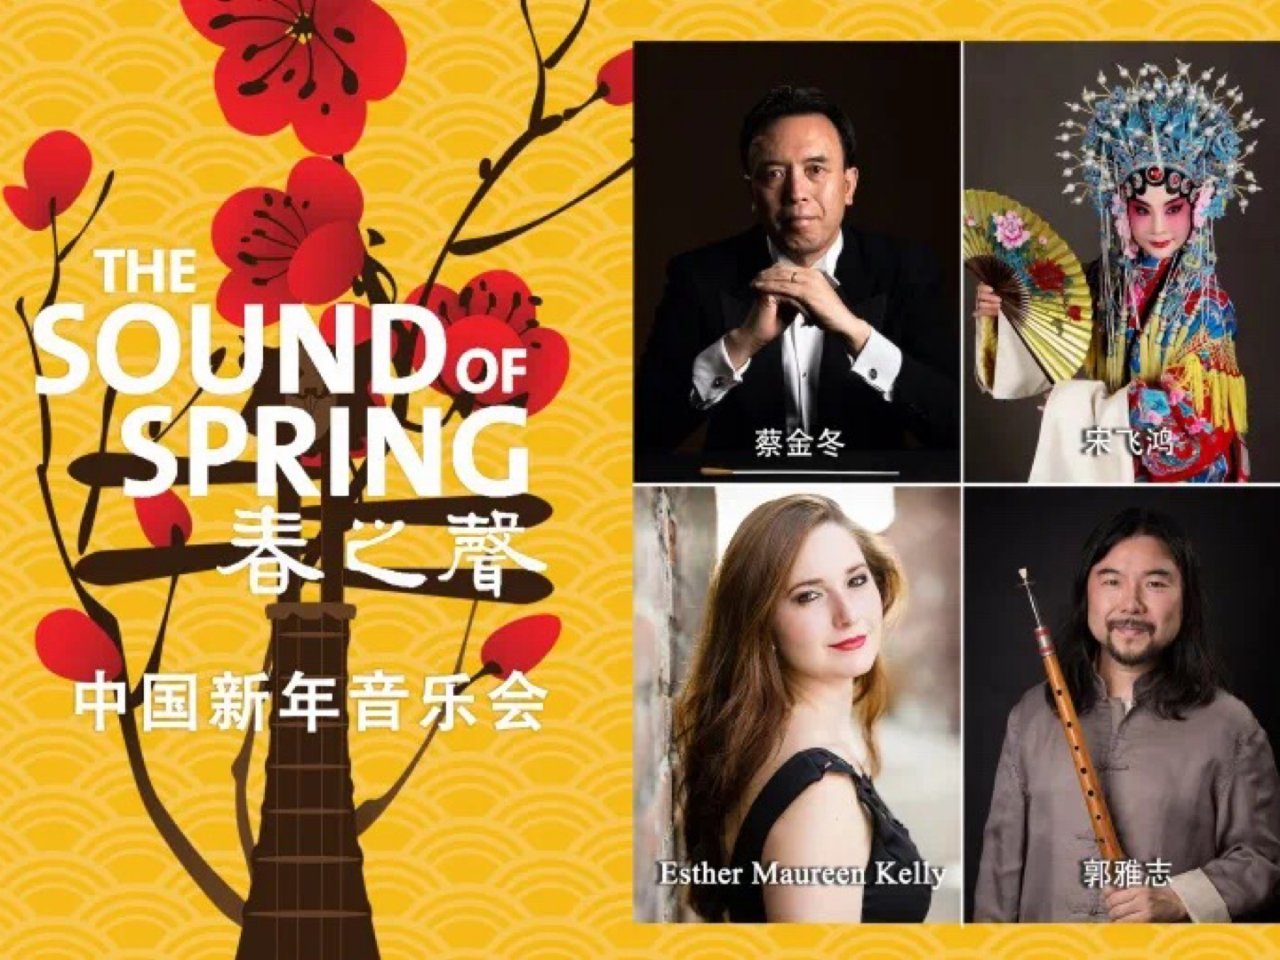 THE SOUND OF SPRING - A Chinese New Year Concert with The Orchestra Now — US-China Music Institute at the Bard College Conservatory of Music 巴德音乐学院美中音乐研习院